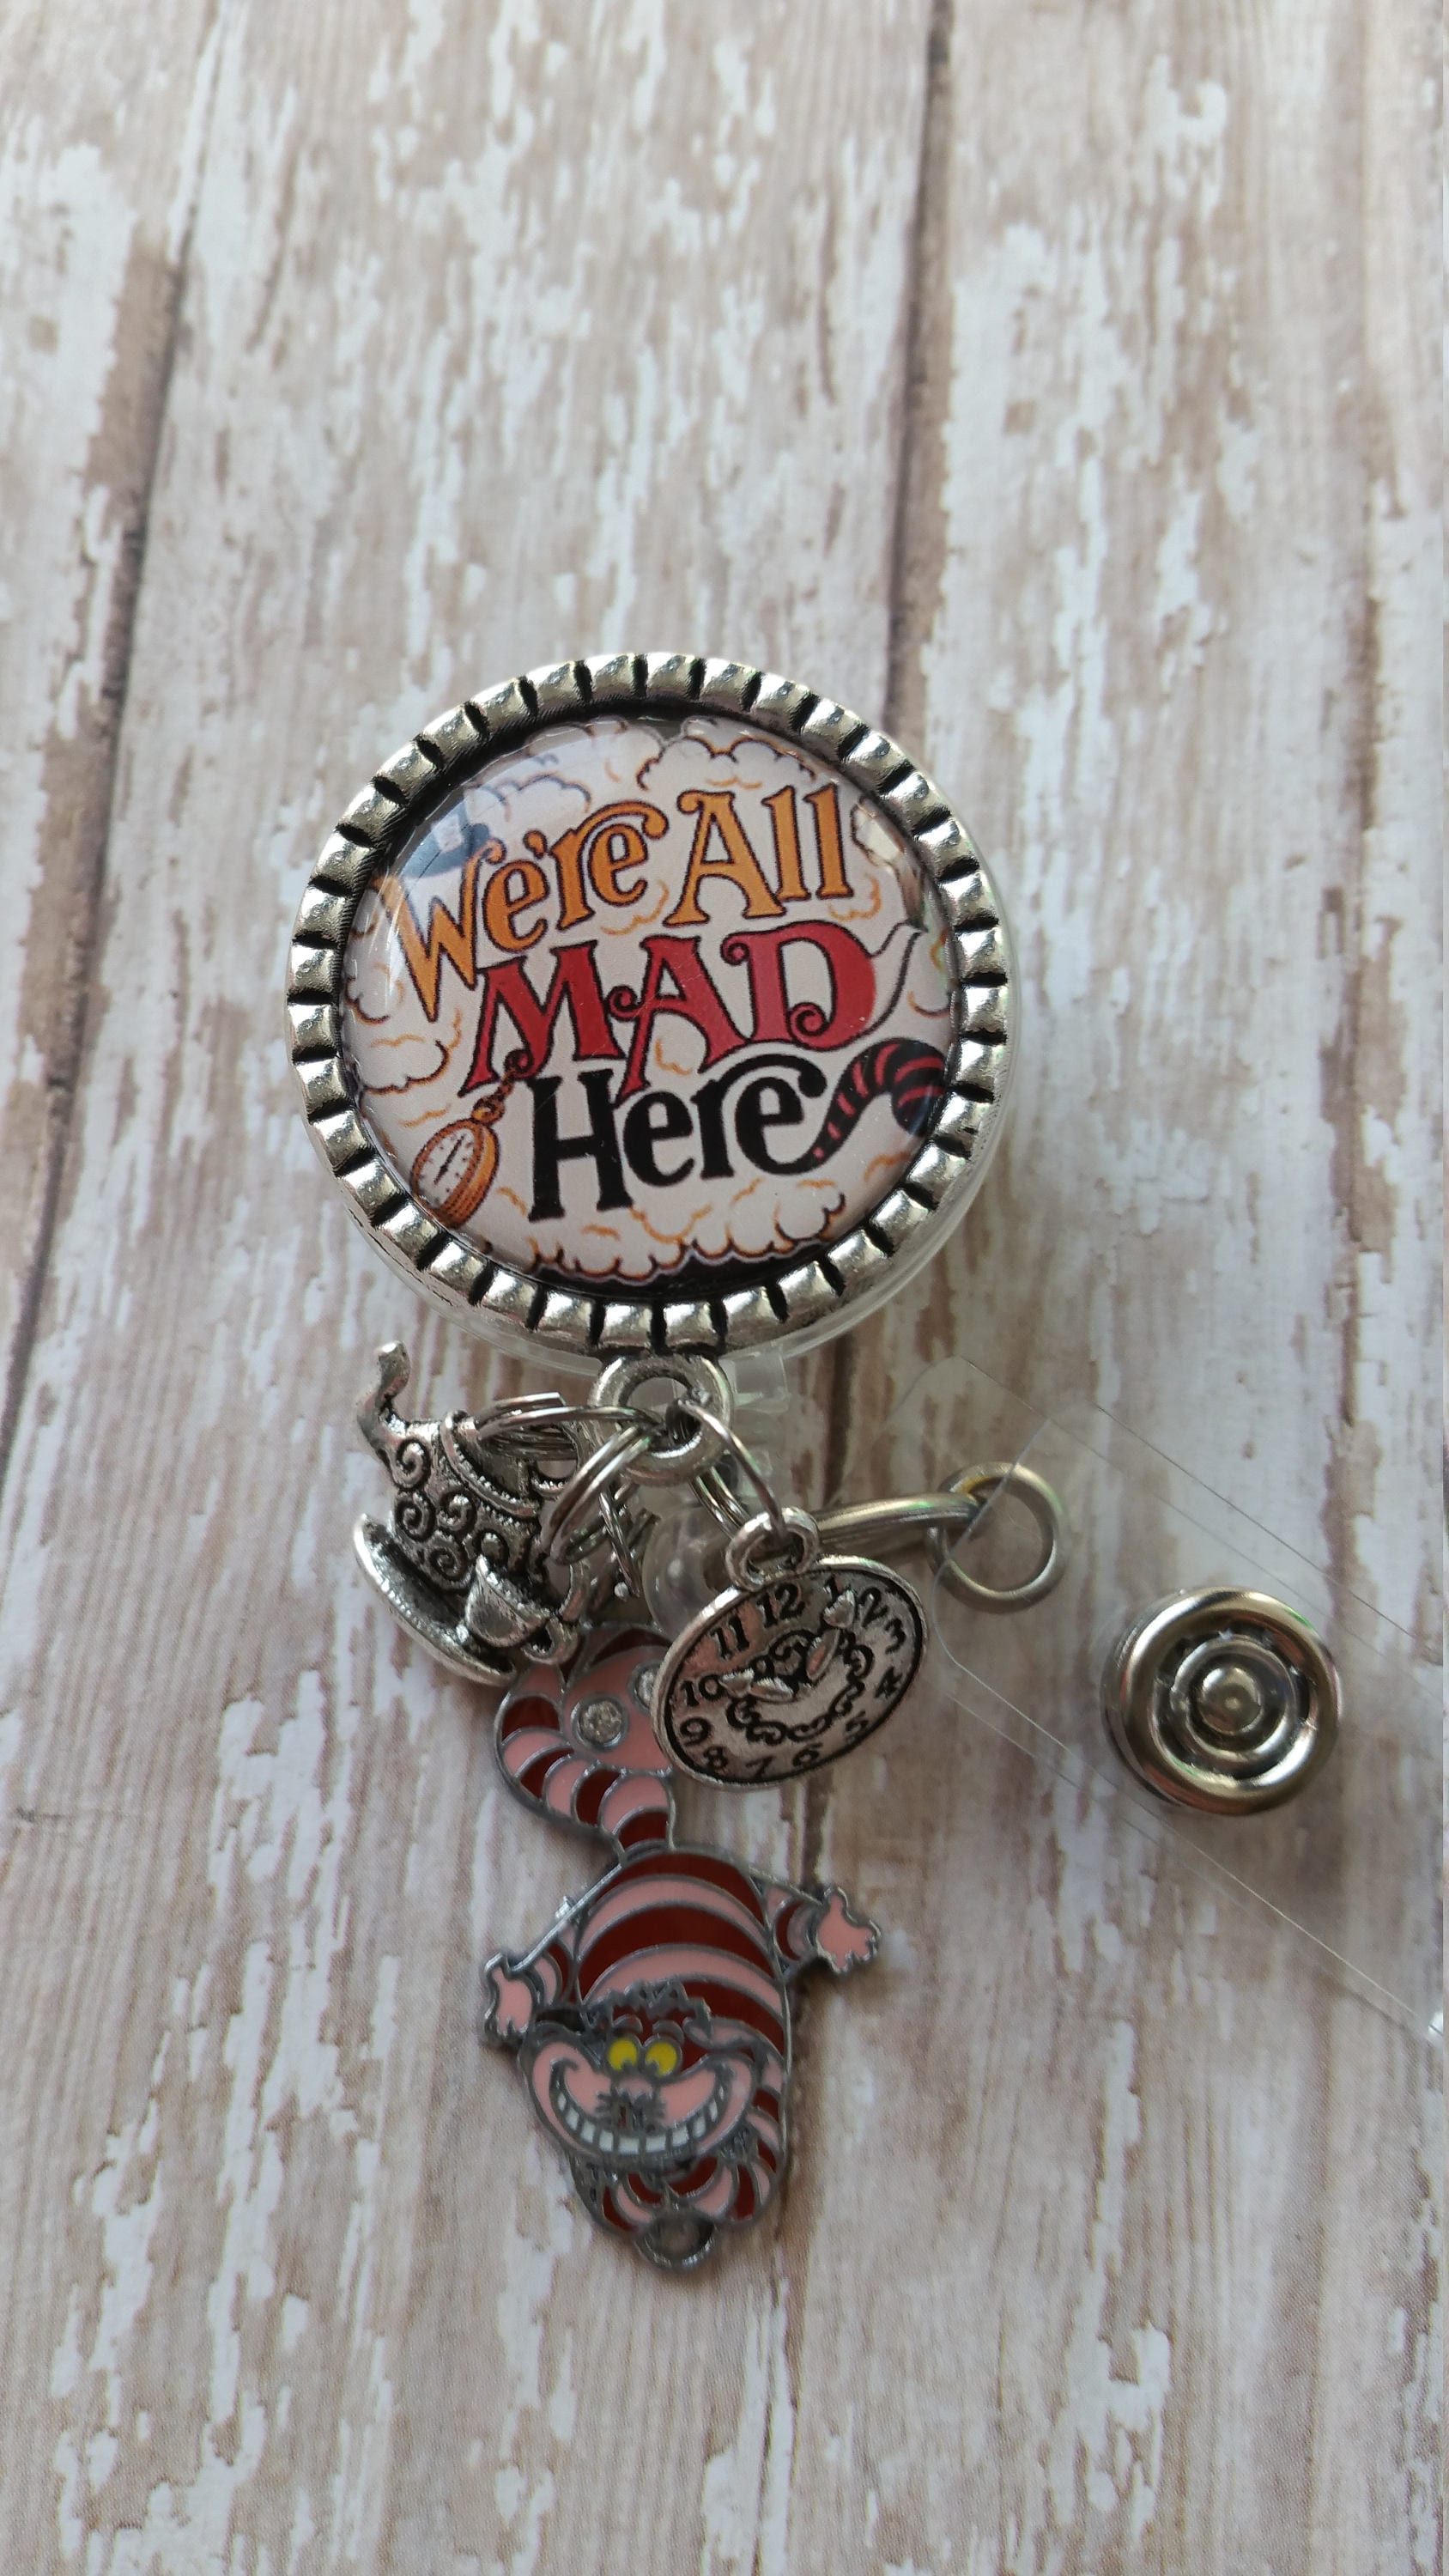 Cheshire Cat See Pictures for Charm Options Low Flat Rate Shipping in US! We/'re All Mad Here Retractable Badge Holder